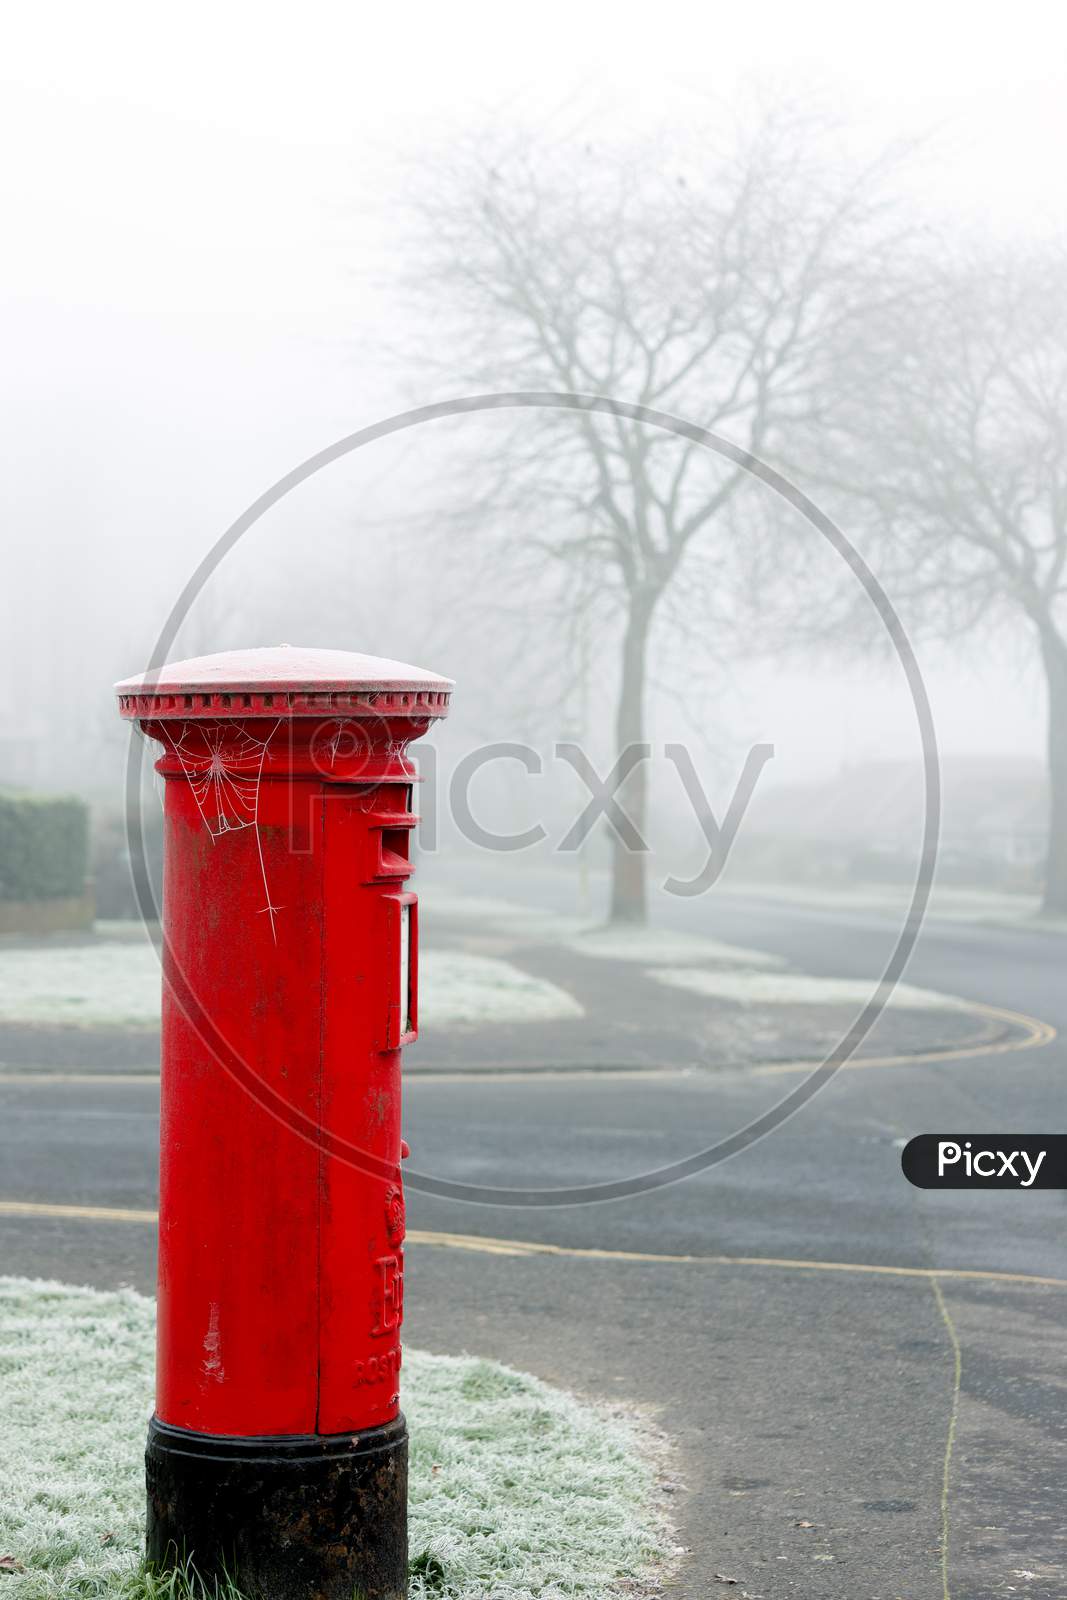 East Grinstead, West Sussex, Uk - January 10 : Hoar Frost On A Red Pillar Box In East Grinstead, West Sussex On January 10, 2021